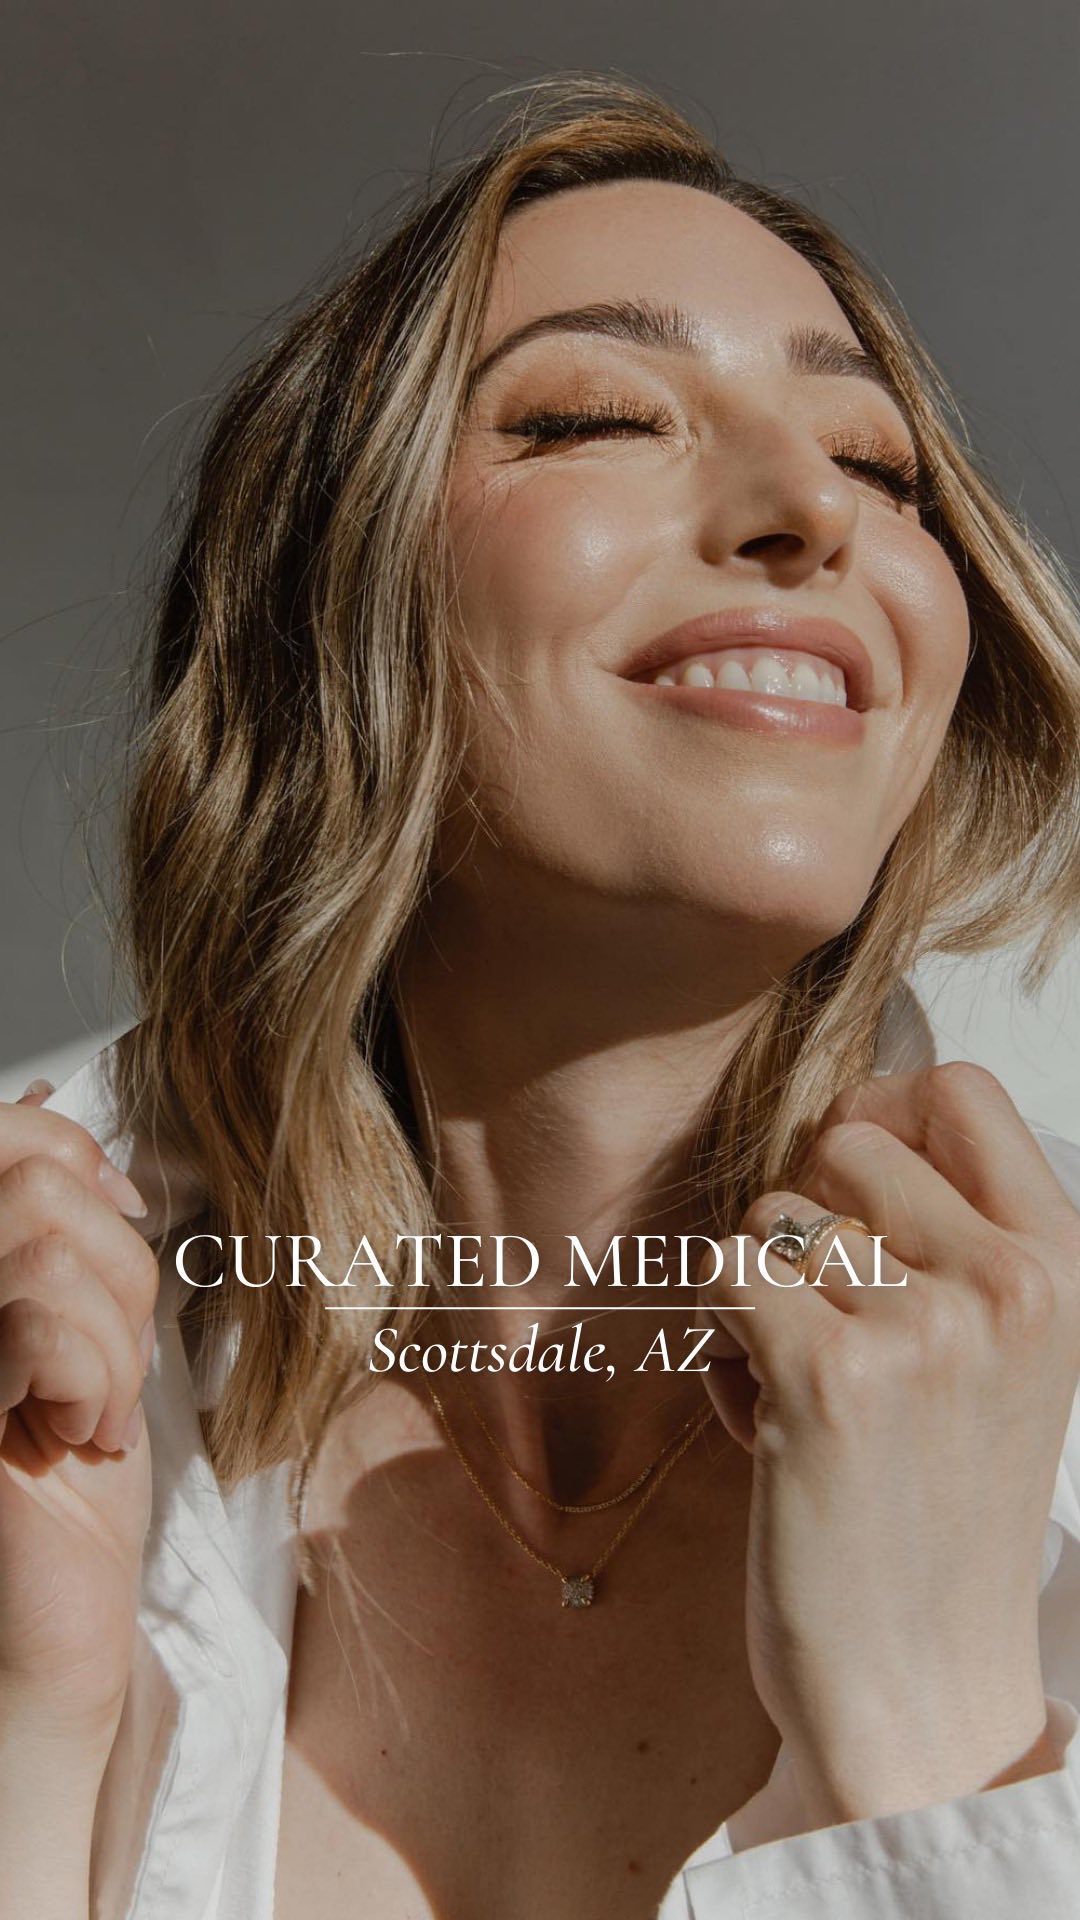 Offering only the most elite aesthetic treatments available, Scottsdale-based @curatedmedical is a trust-worthy resource for those seeking efficacy, safety and natural, long-term results.

Dr. Mann, and her first-class team at Curated Medical Scottsdale, strive to make clients look–and feel–like the best version of themselves via the med spa’s extensive offering of services: BOTOX, Dysport, PDO Thread Lifts, QWO cellulite treatments, microneedling, facial fillers, LaseMD laser technology and more.